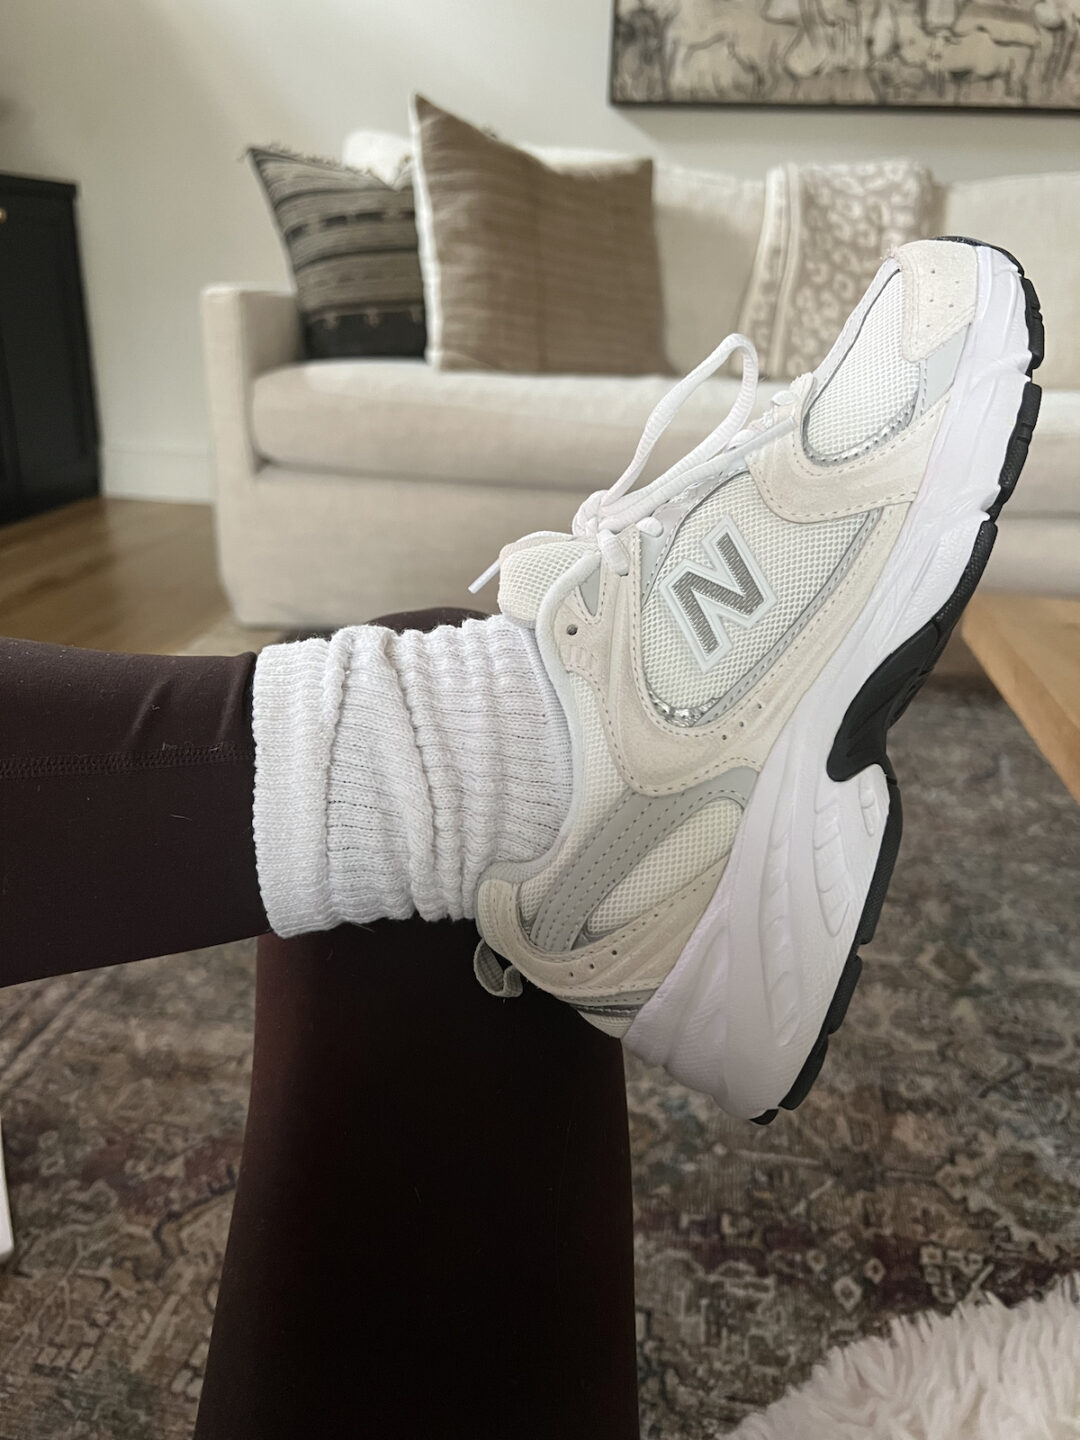 New Balance Sneakers Review • BrightonTheDay